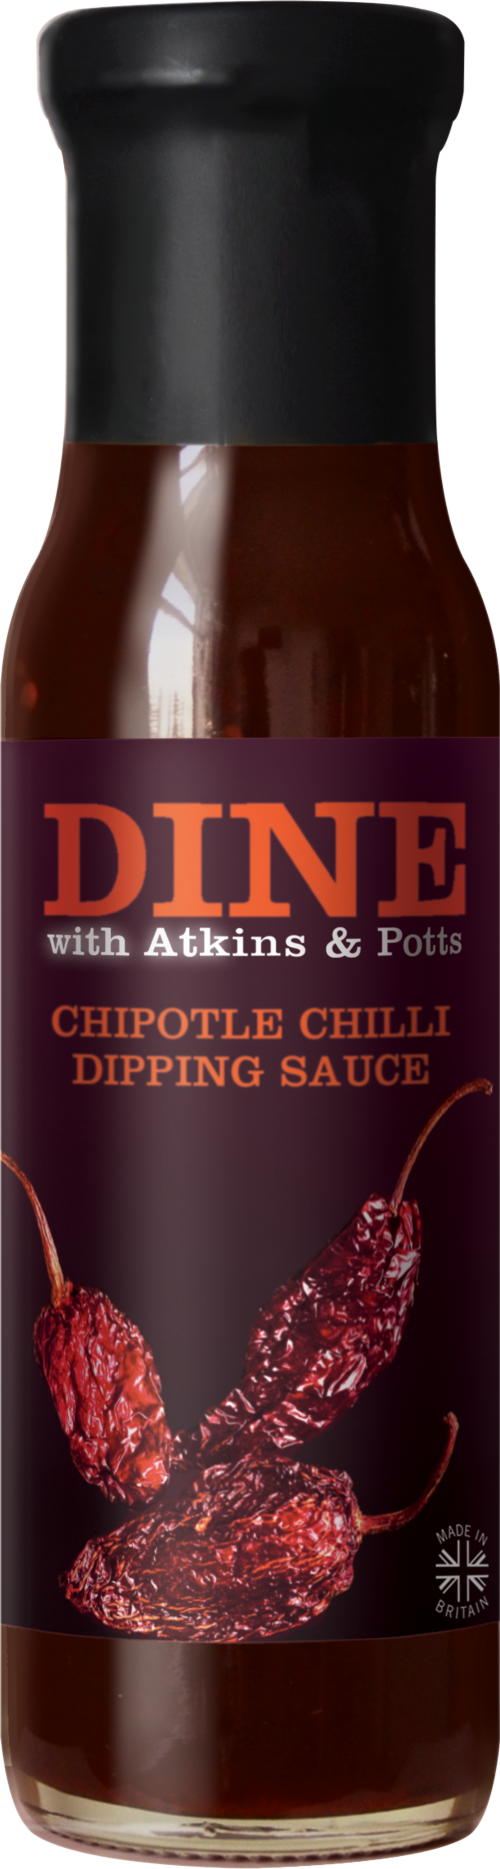 ATKINS & POTTS Chipotle Chilli Dipping Sauce 290g